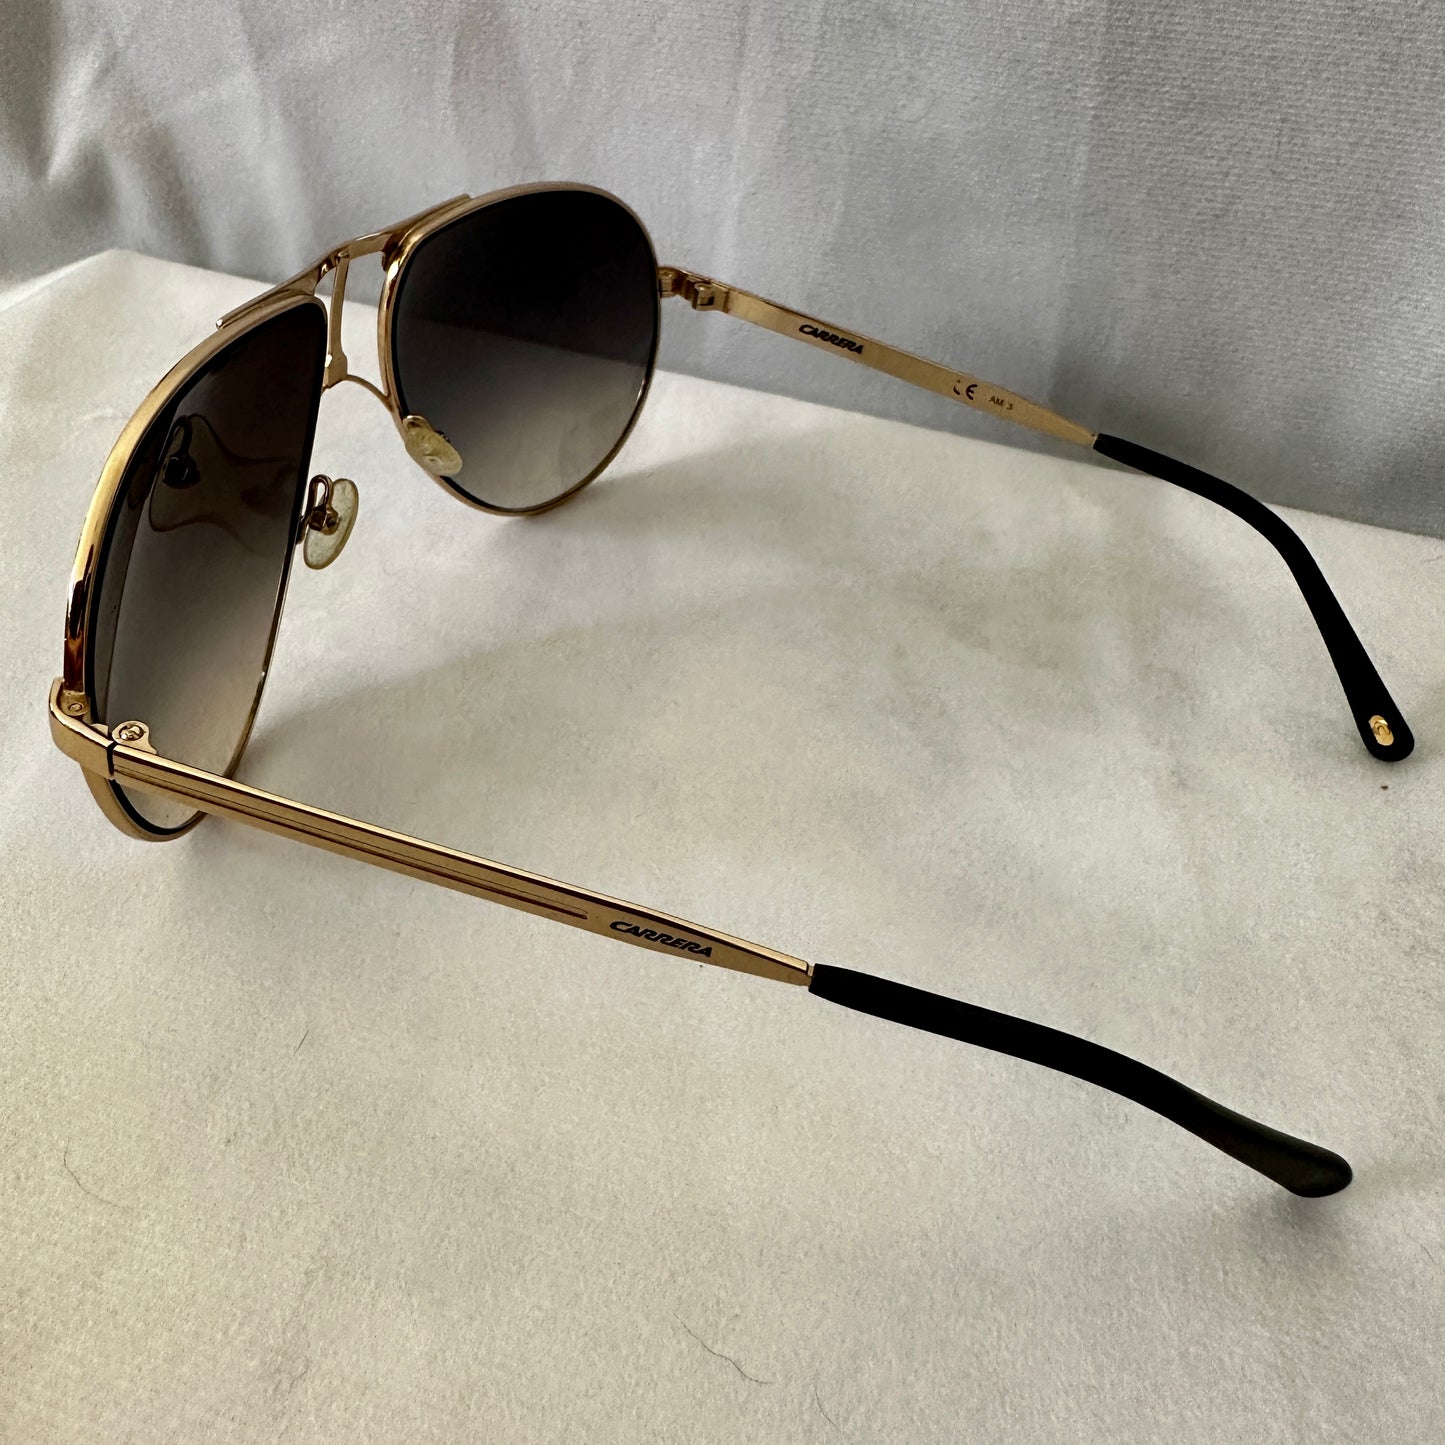 Carrera 5914 Vintage Sunglasses - Made in Italy